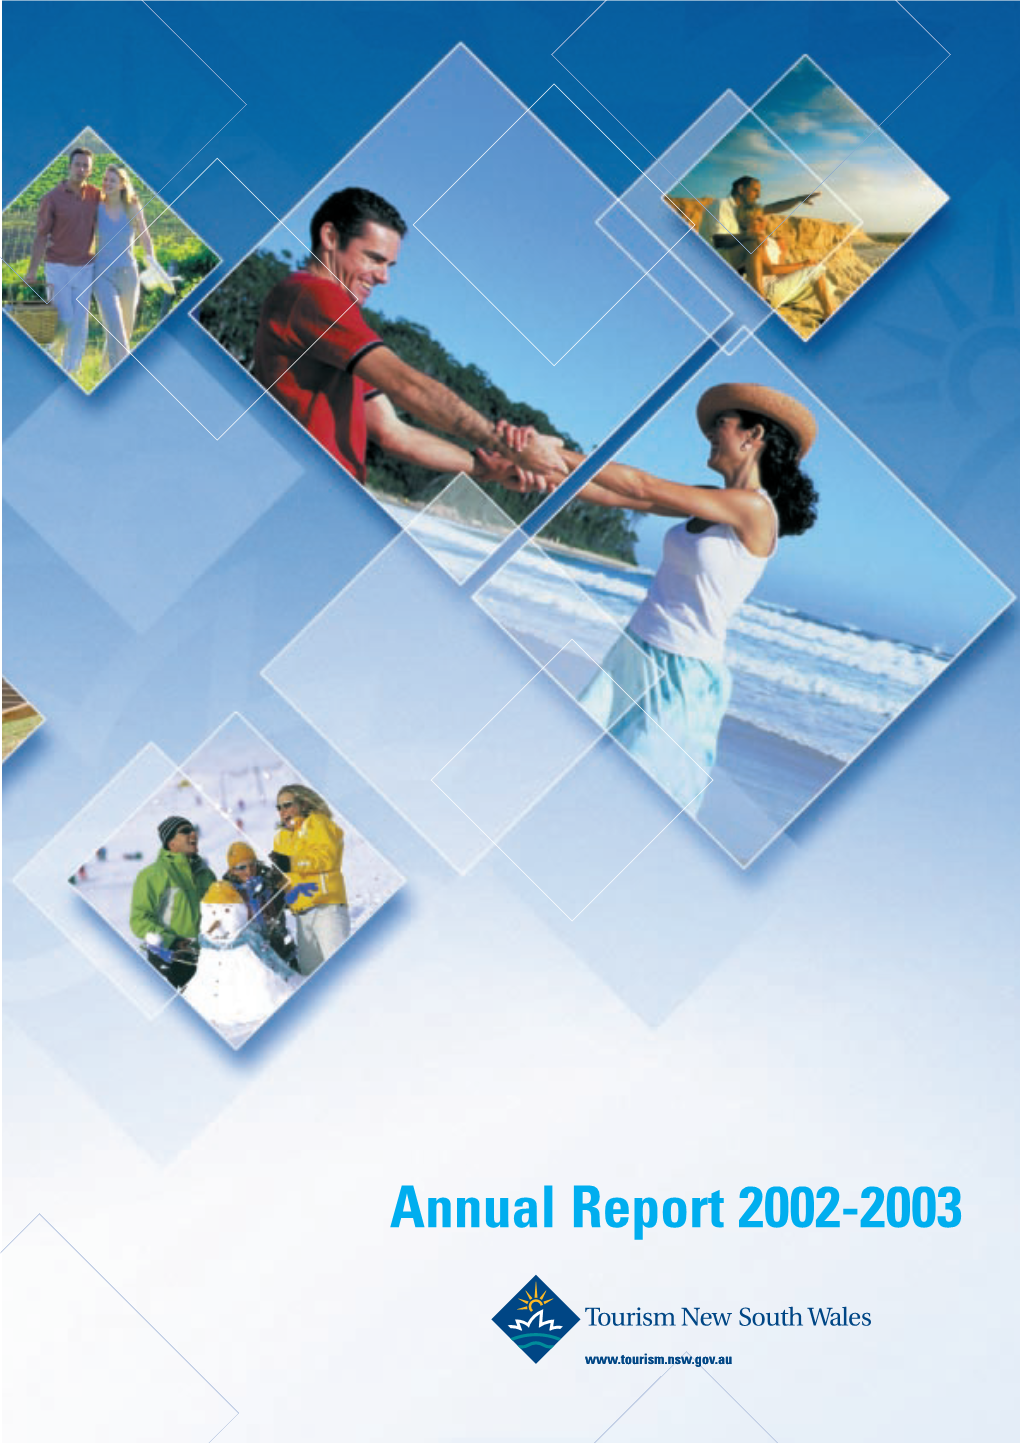 Annual Report 2002-2003 Letter of Transmission Contents